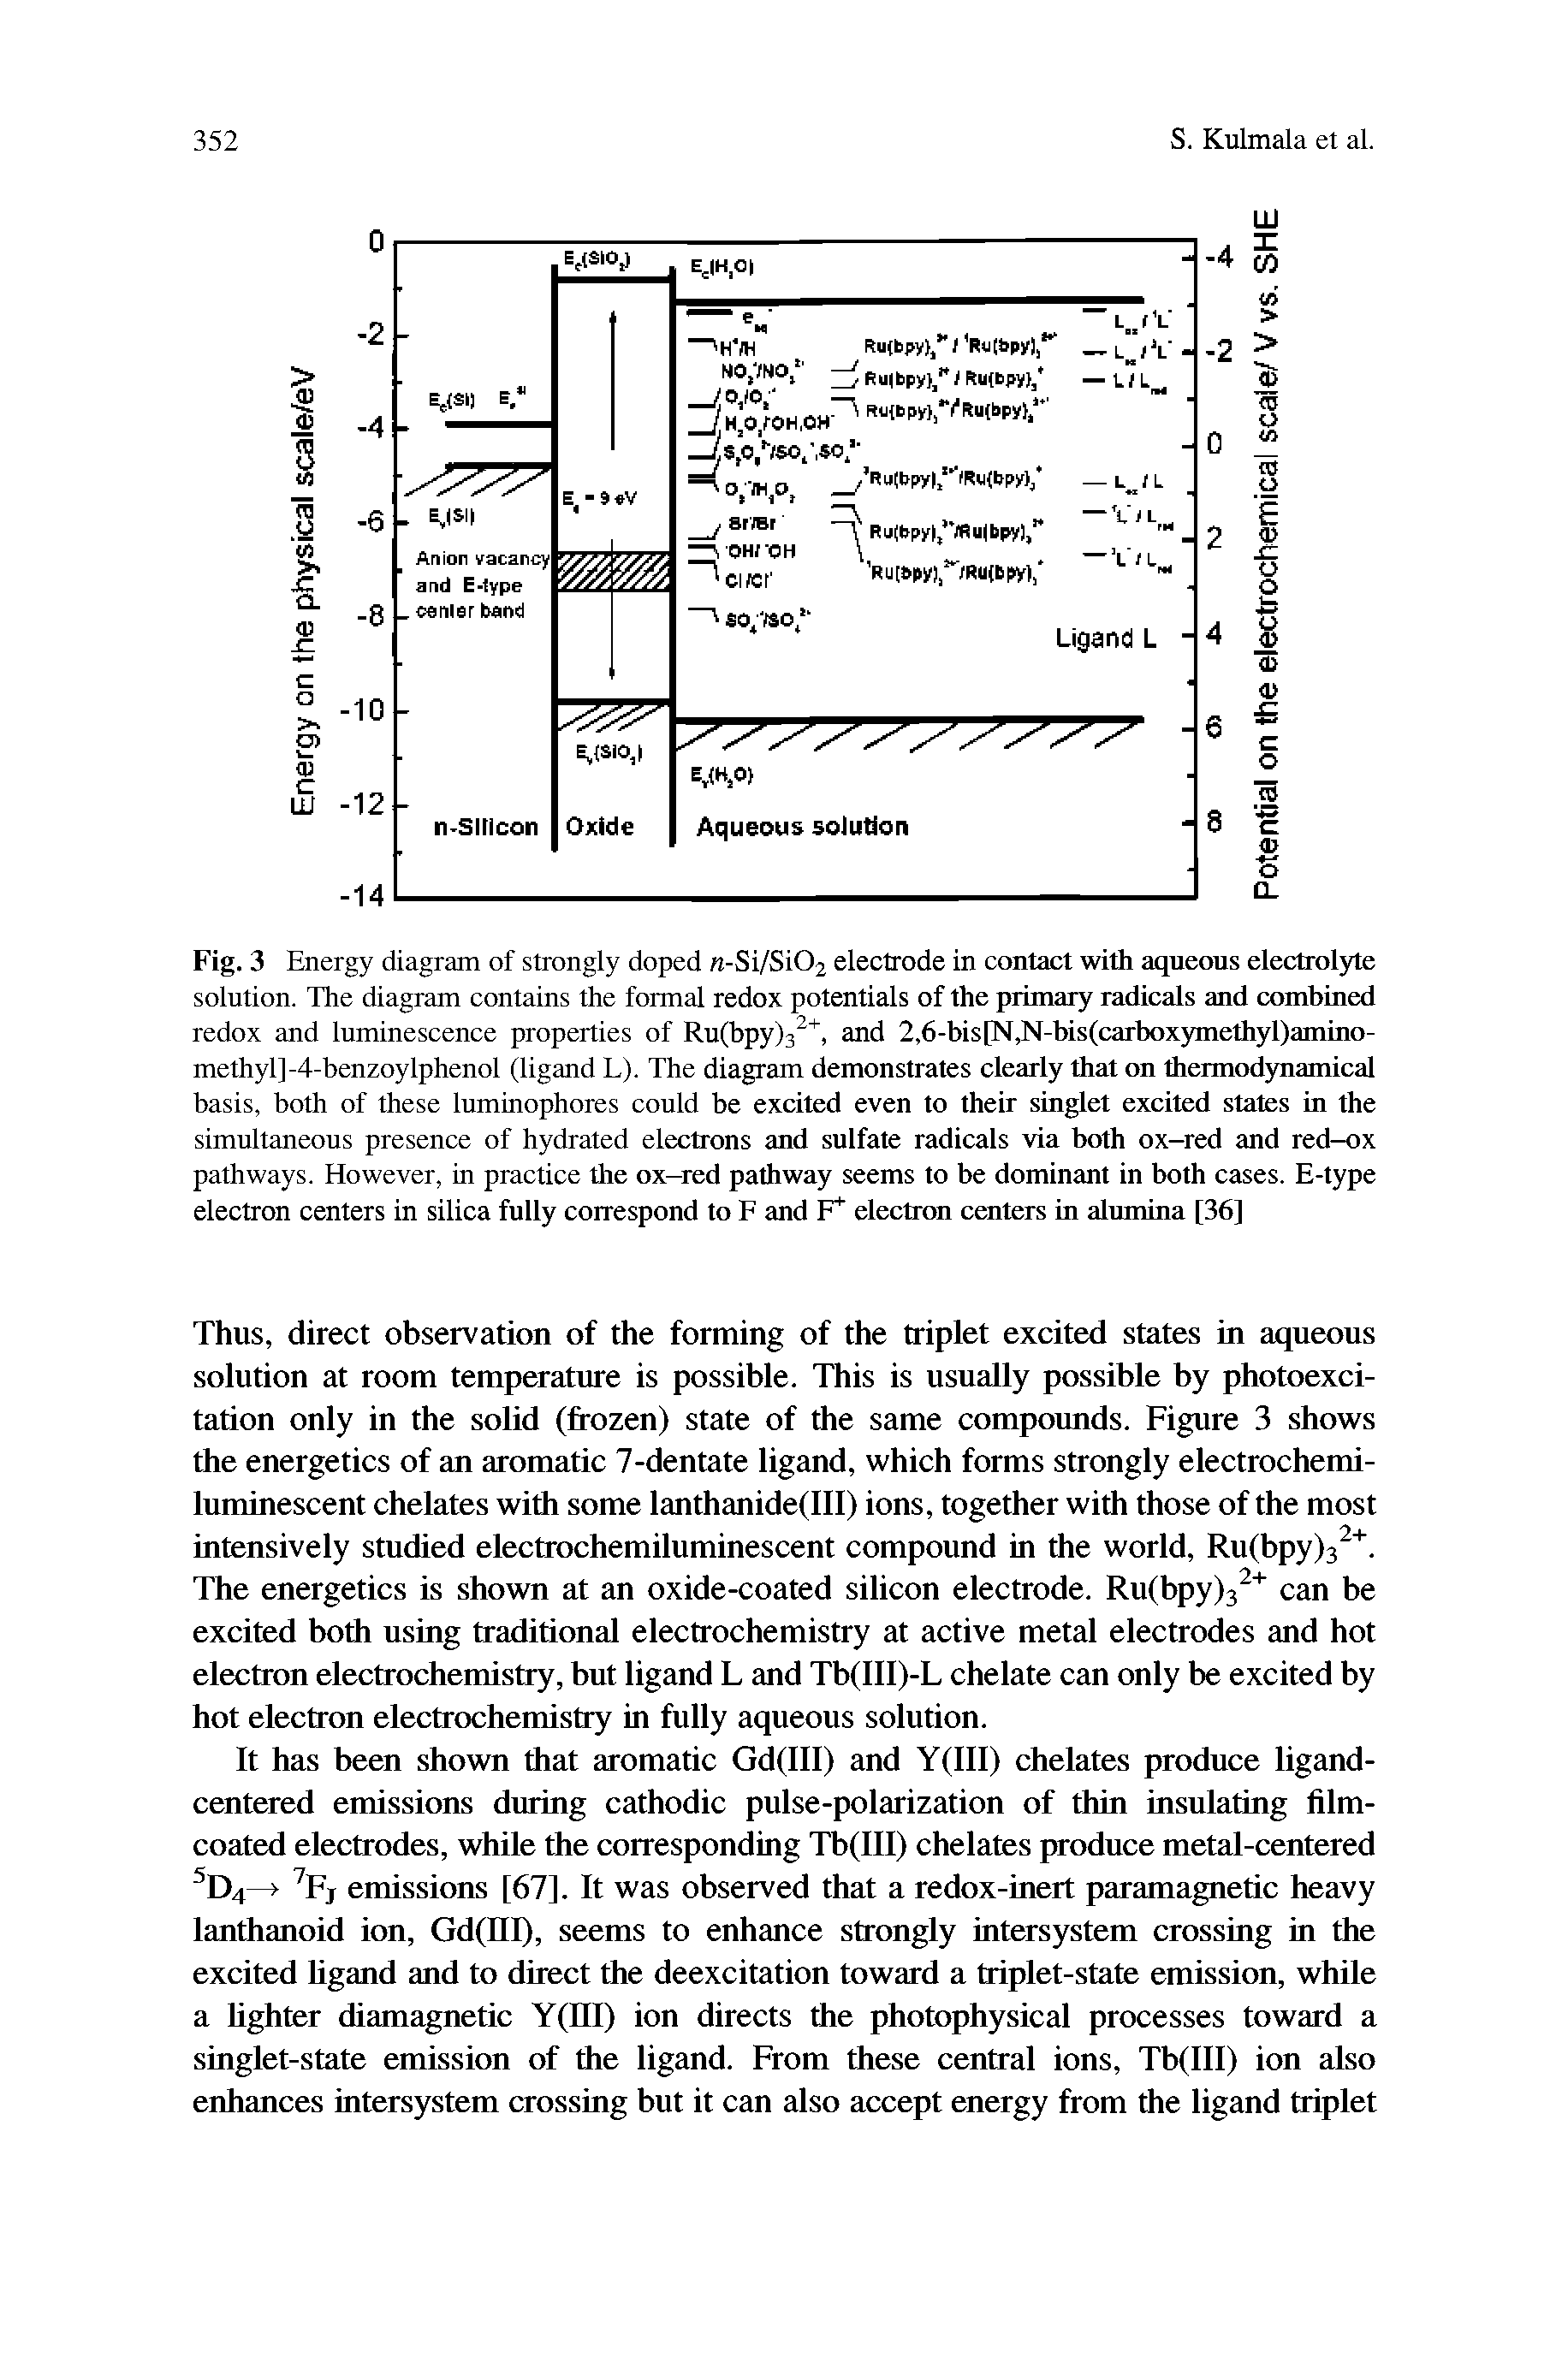 Fig. 3 Energy diagram of strongly doped n-Si/Si02 electrode in contact with aqueous electrolyte solution. The diagram contains the formal redox potentials of the primary radicals and combined redox and luminescence properties of Ru(bpy)3, and 2,6-bisPM,N-bis(carboxymethyl)amino-methyl]-4-benzoylphenol (ligand L). The diagram demonstrates clearly that on thermodynamical basis, both of these luminopbores could be excited even to their singlet excited states in the simultaneous presence of hydrated electrons and sulfate radicals via both ox-red and red-ox pathways. However, in practice the ox-red pathway seems to be dominant in both cases. E-type electron centers in silica fully correspond to F and F electron centers in alumina [36]...